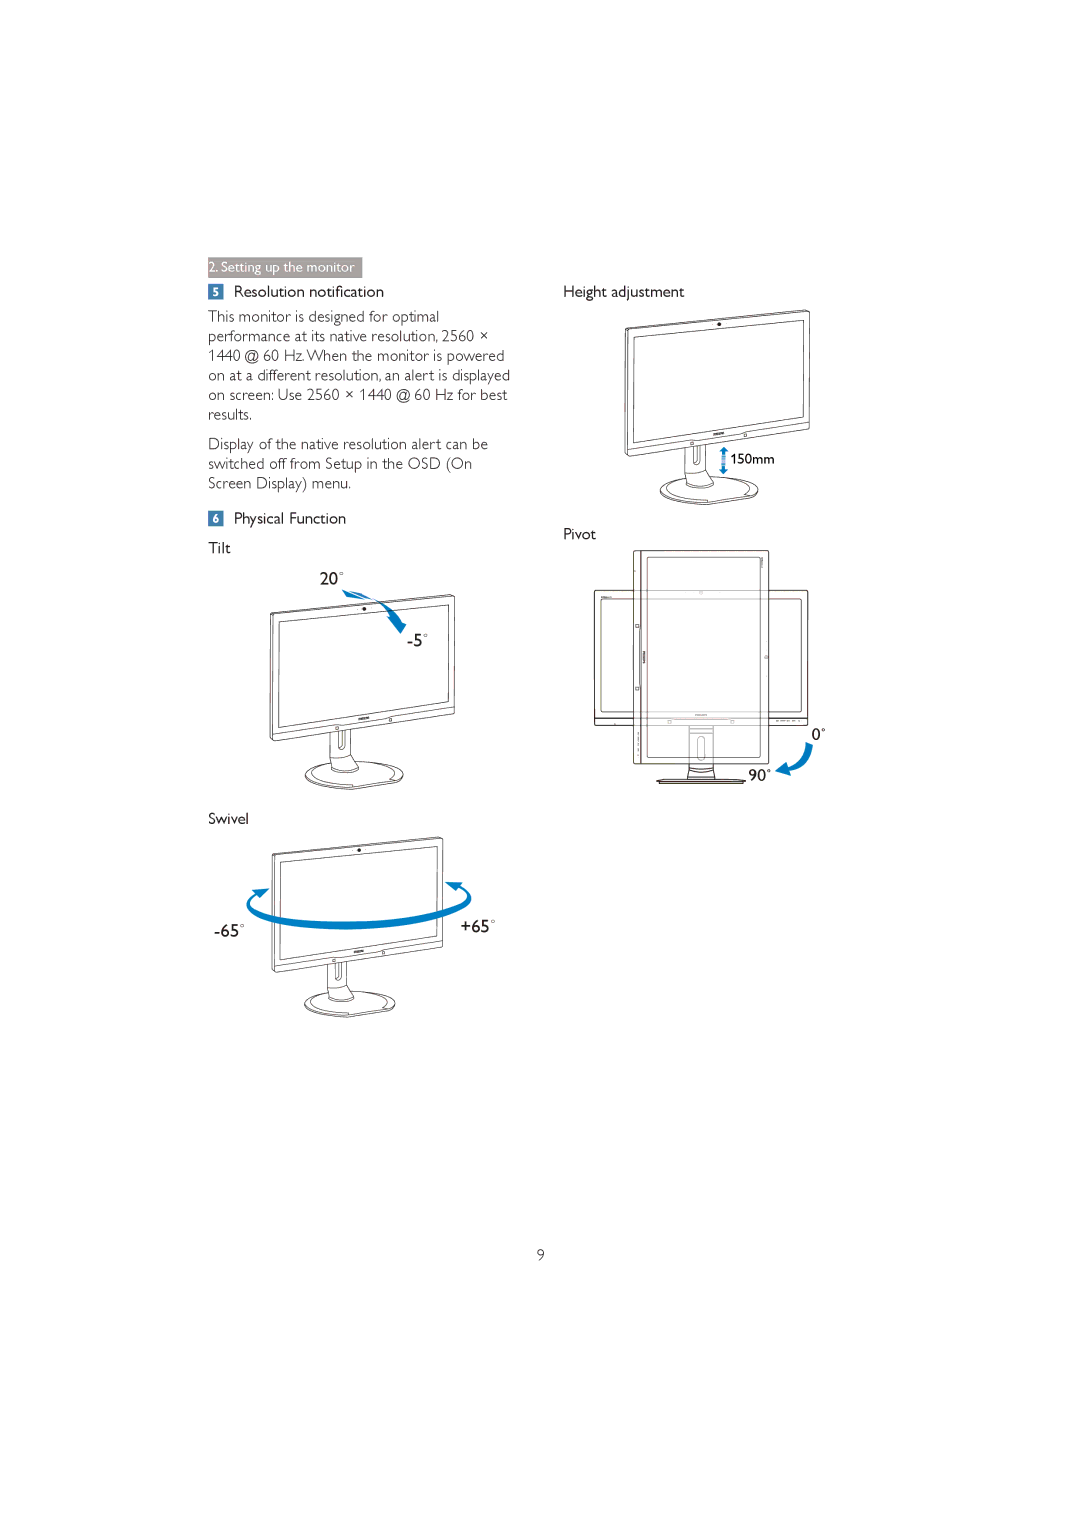 Philips 272P4 user manual 5HVROXWLRQQRWLÀFDWLRQ, Switched off from Setup in the OSD On, Swivel 